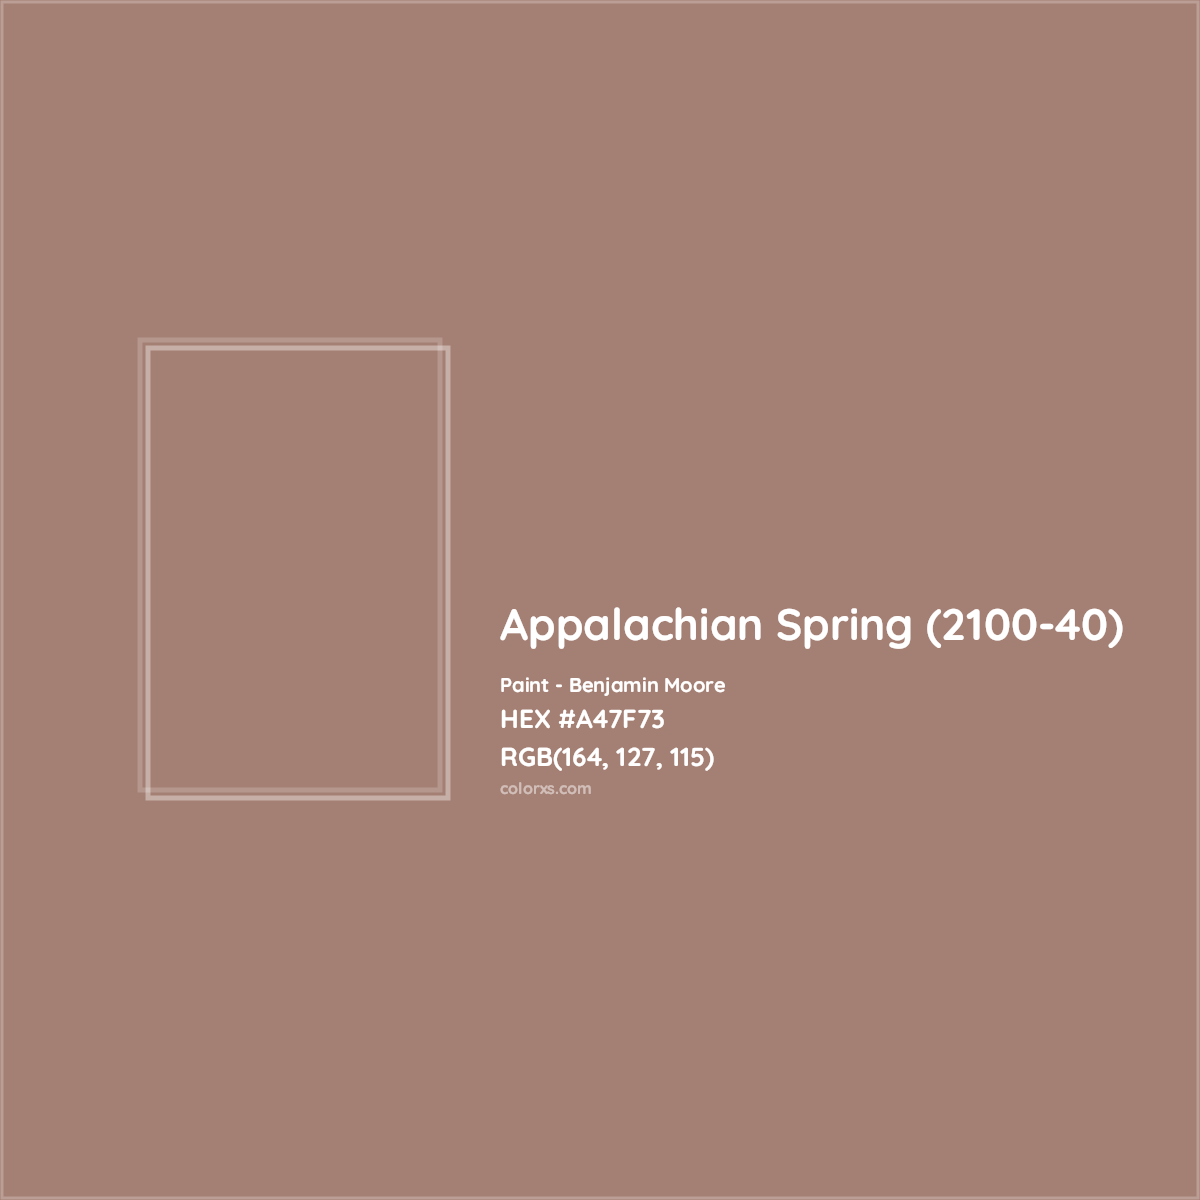 HEX #A47F73 Appalachian Spring (2100-40) Paint Benjamin Moore - Color Code